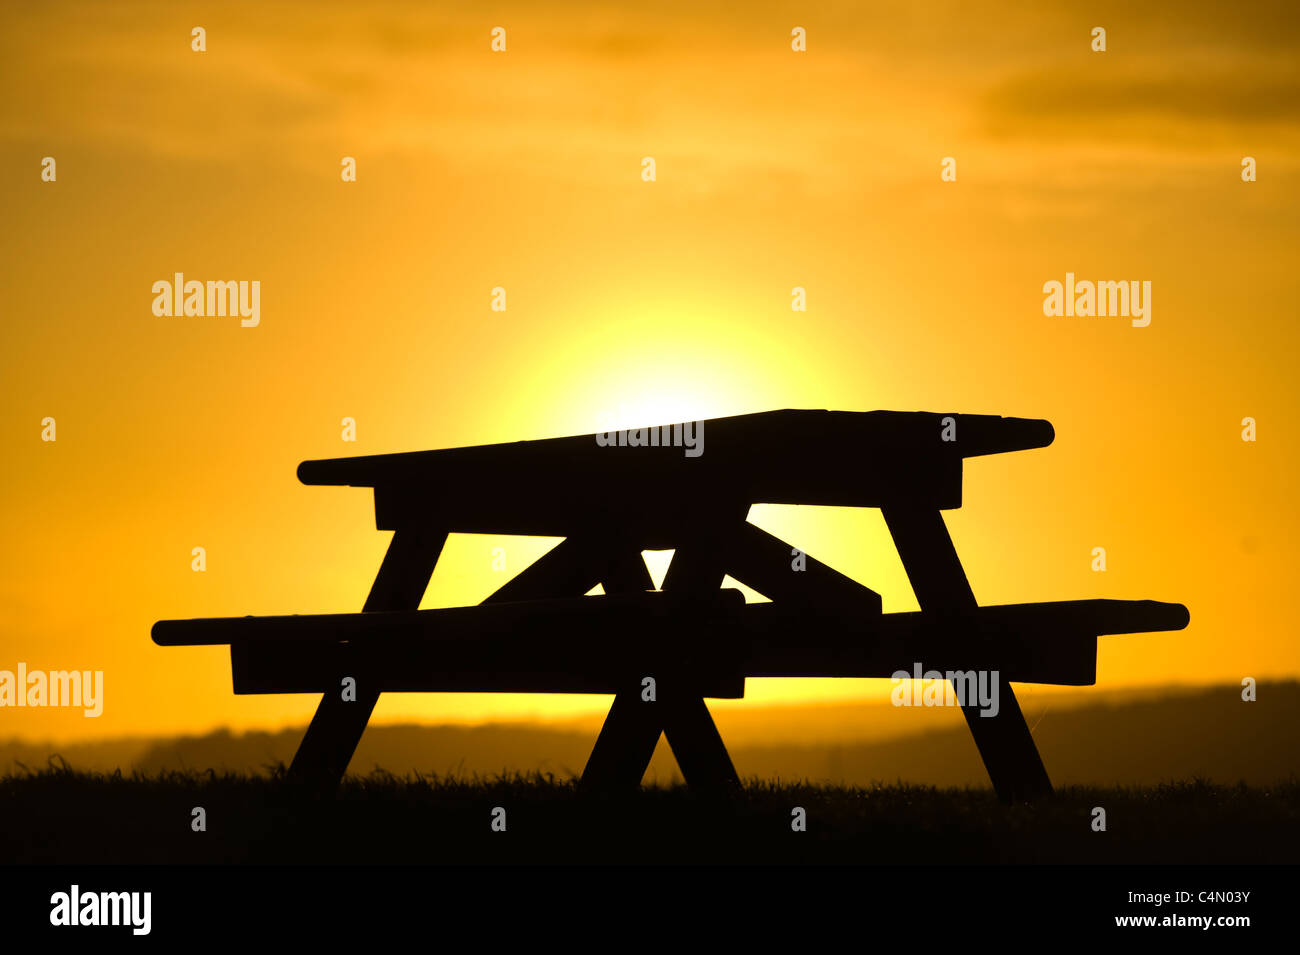 Picnic bench silhouetted at sunset Stock Photo